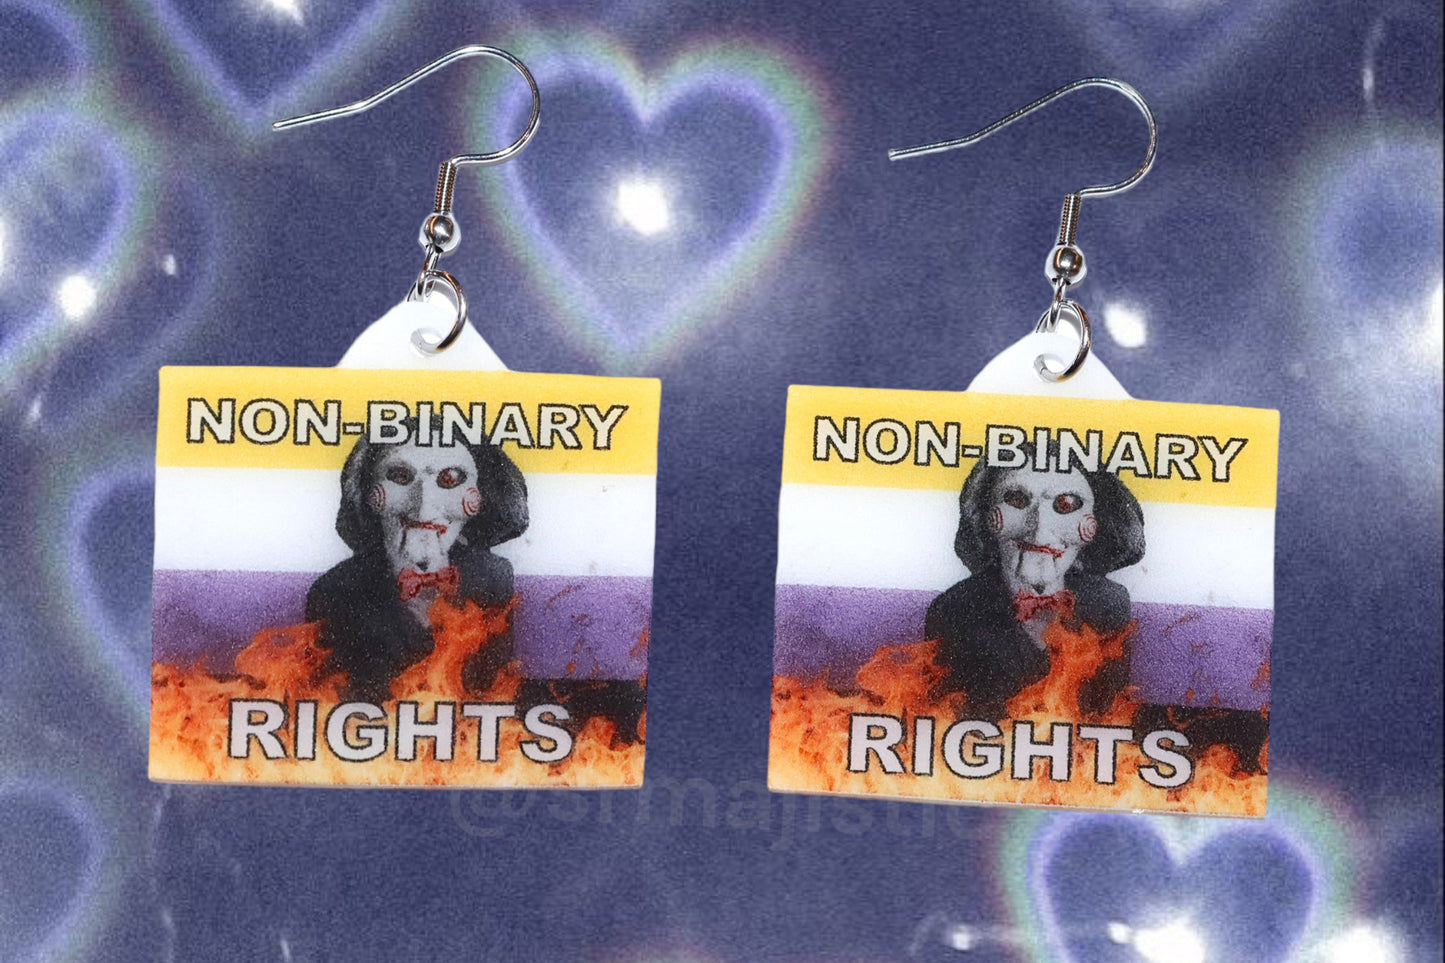 (READY TO SHIP) Jigsaw / Billy the Puppet Saw Character Collection of Flaming Pride Flags Handmade Earrings!